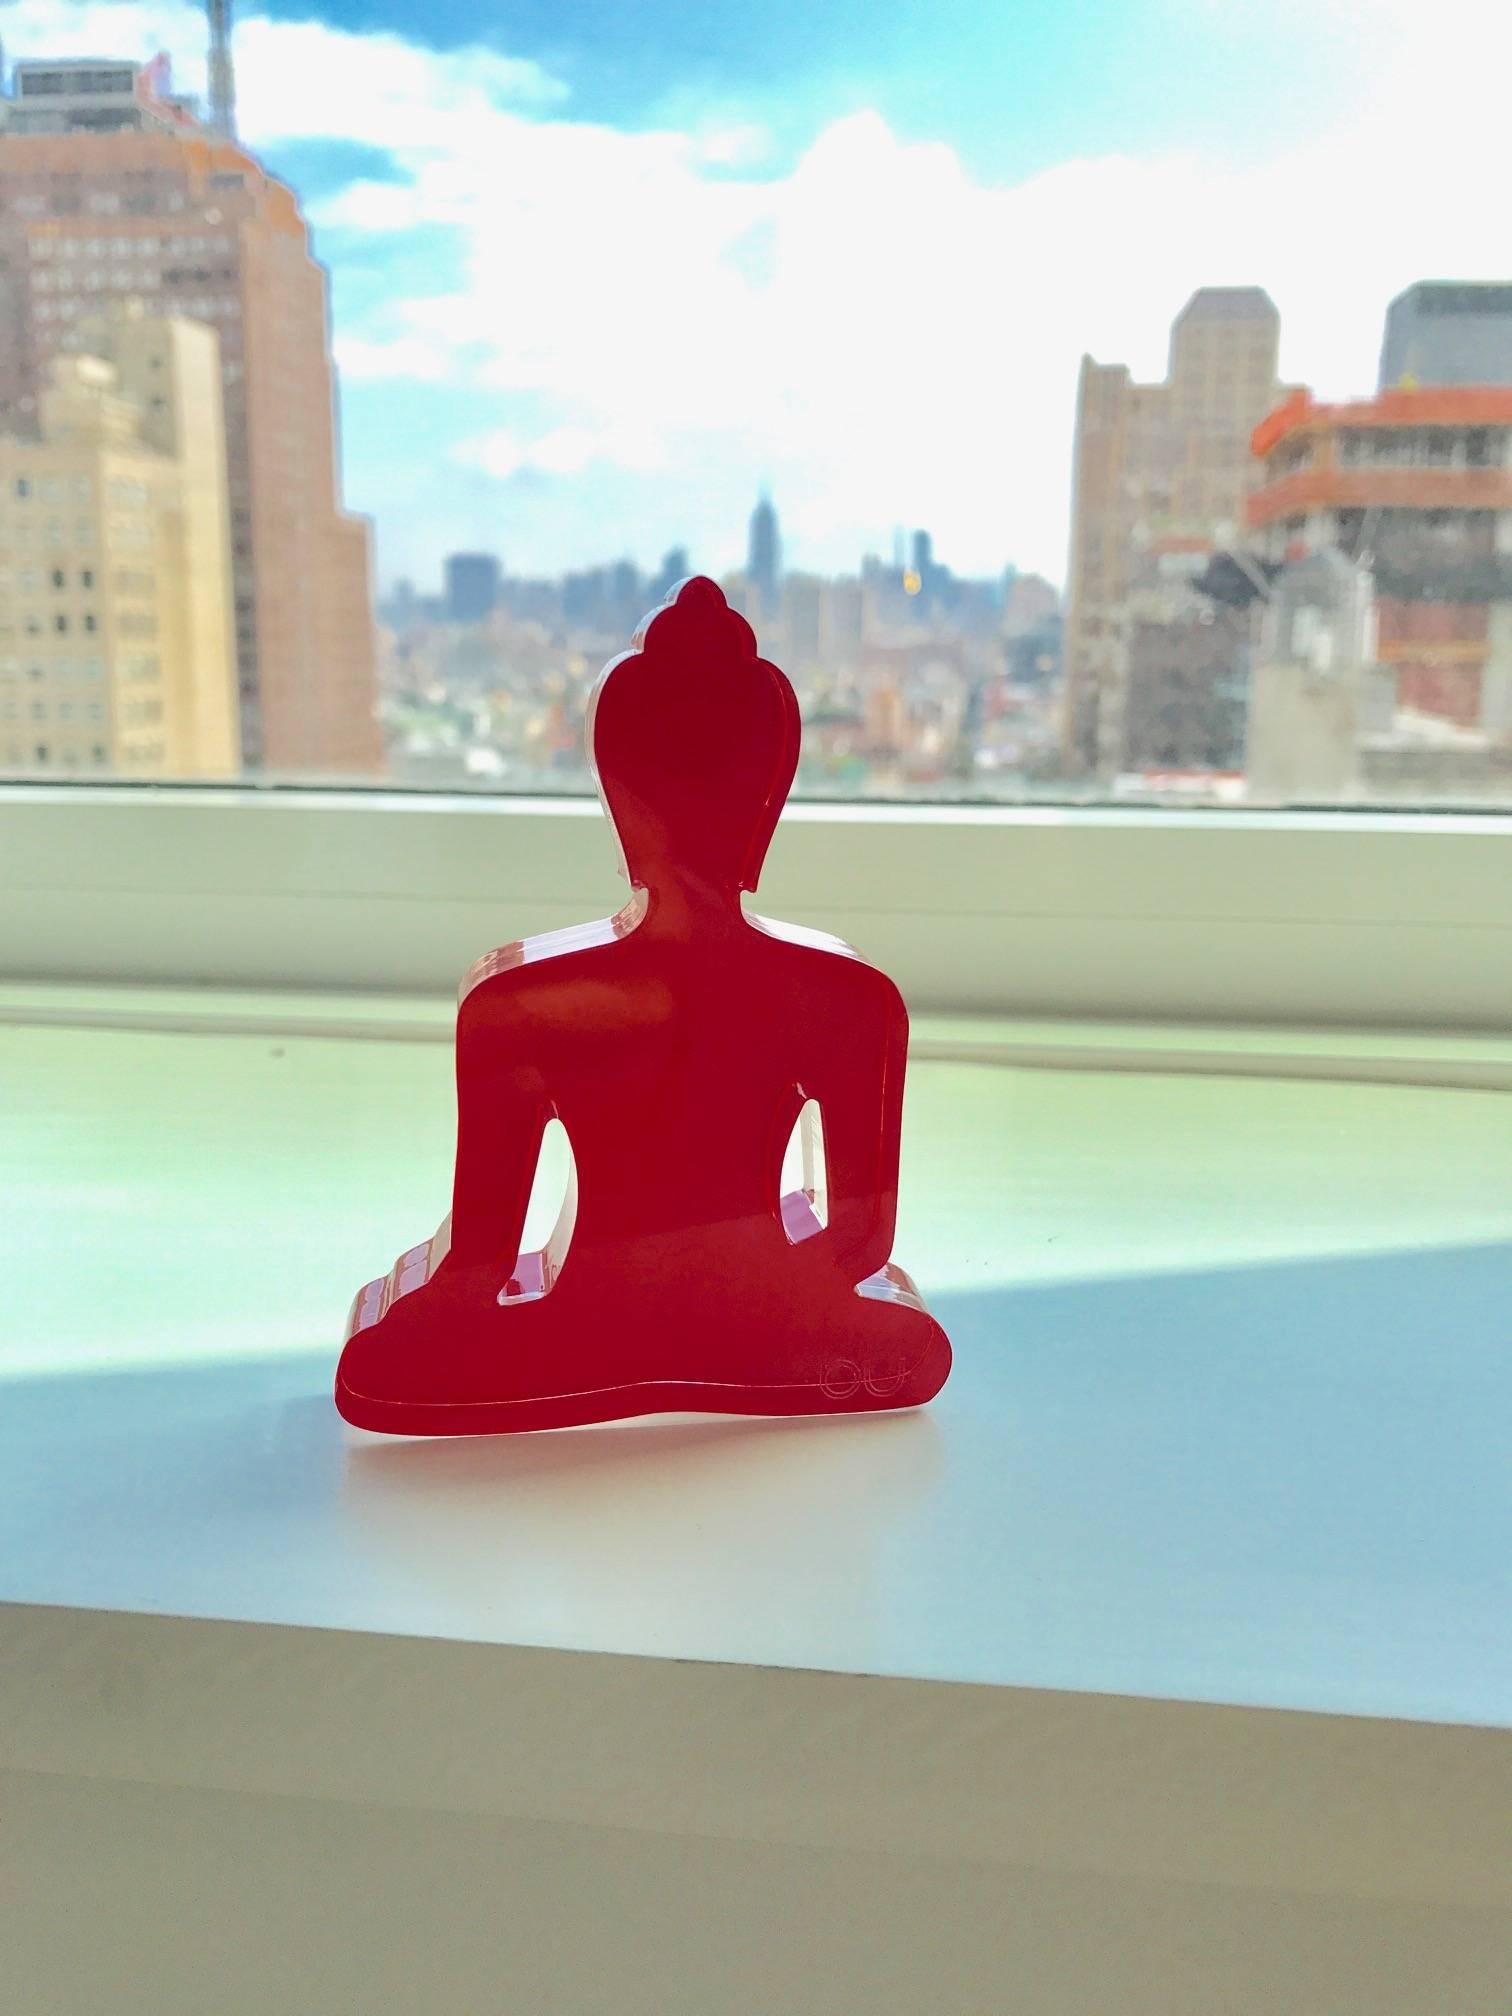 These colorful meditating Buddha silhouette statues are laser cut Plexiglas and acrylic hand painted.
The mini Buddha statues are designed as an everyday reminder to live a compassionate and mindful life. 
The statues are a contemporary design,